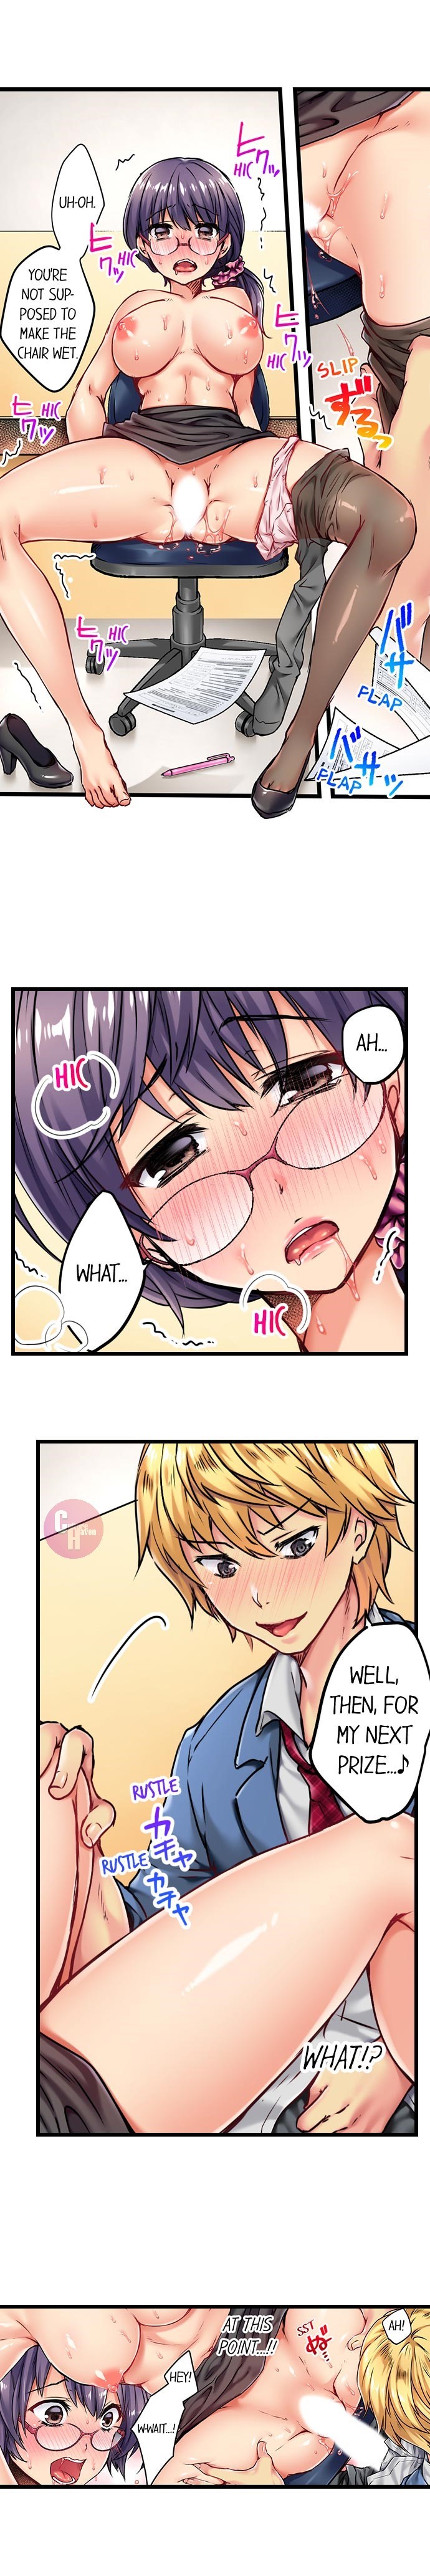 Rewarding My Student With Sex - Chapter 3 Page 2